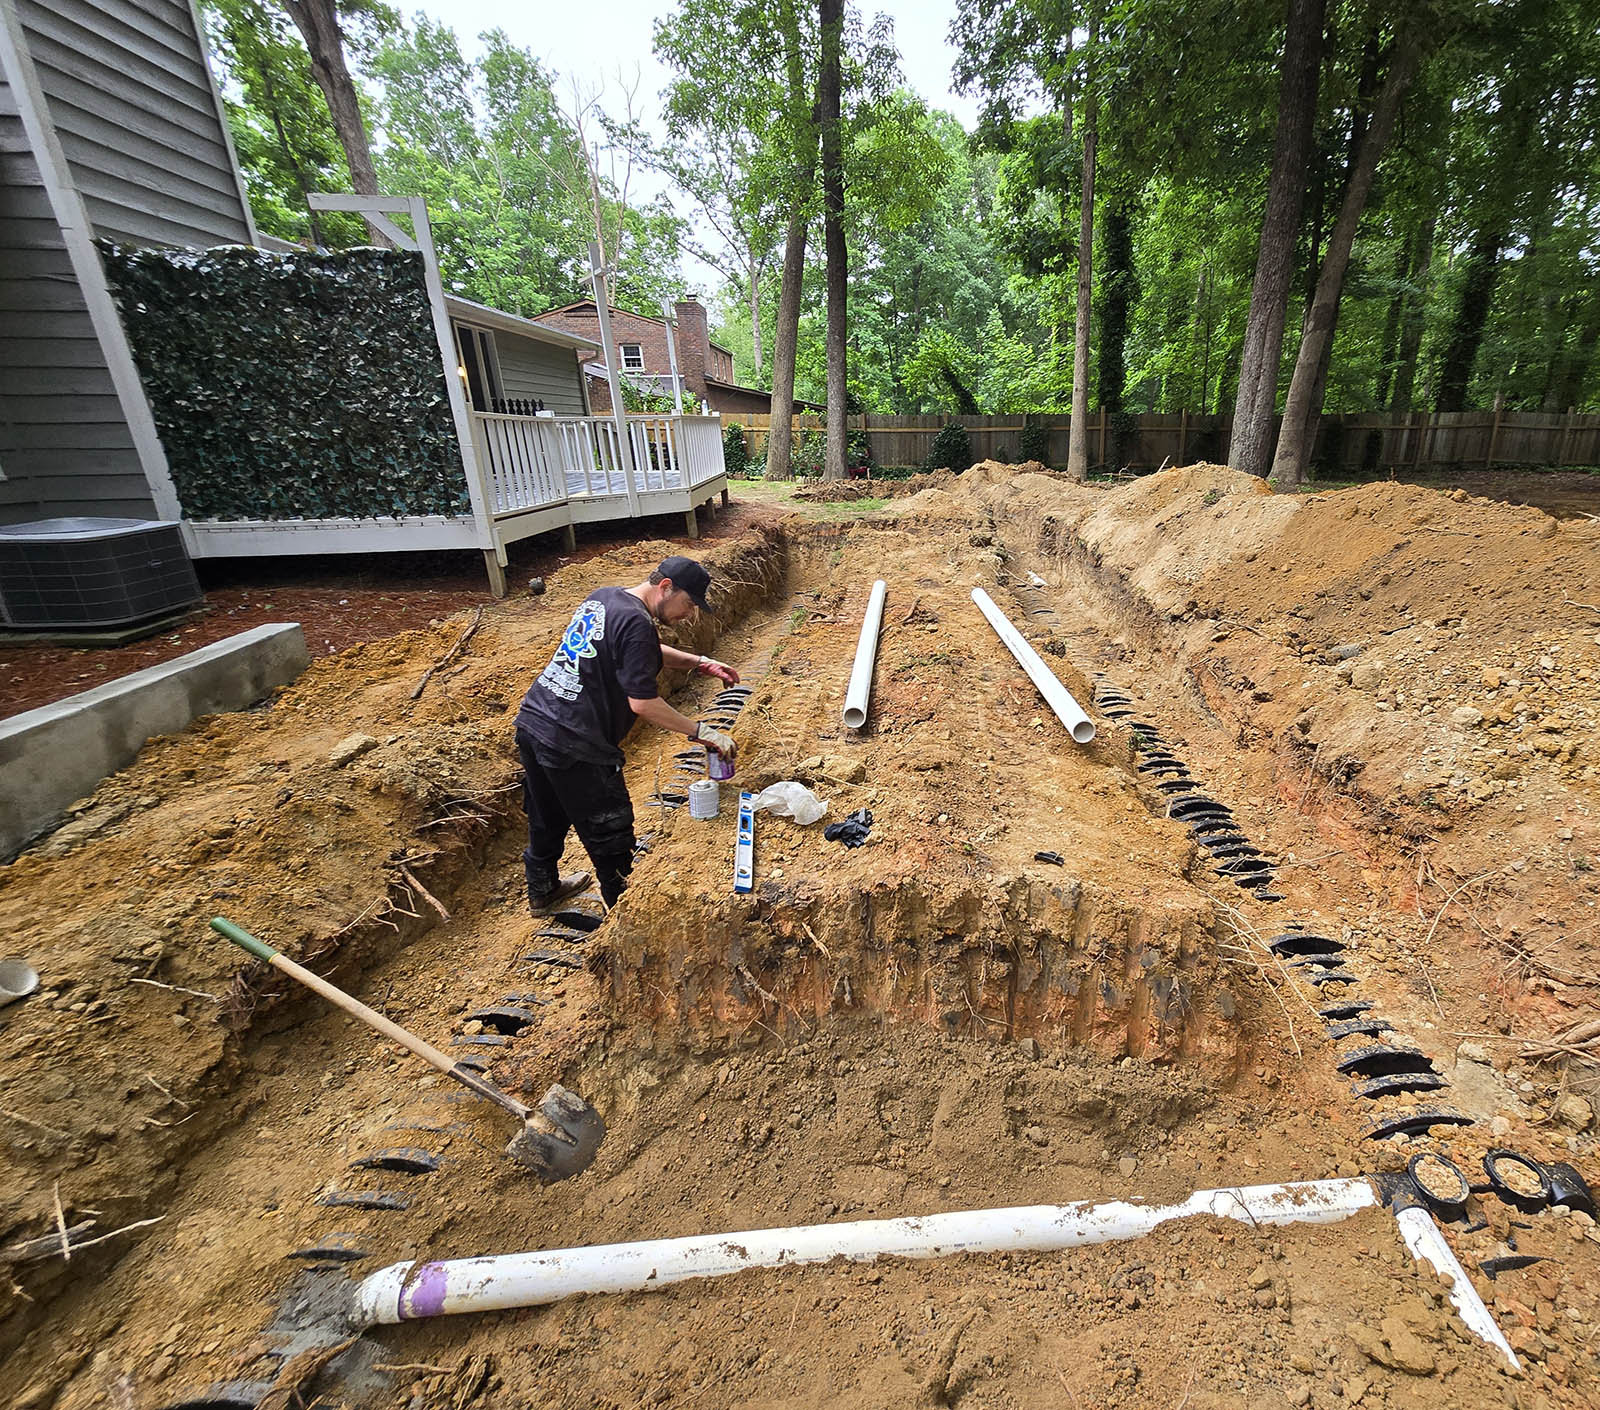 A person works in a deep excavated site next to a house, surrounded by trees. Various pipes and tools from a septic tank company are scattered around the area.